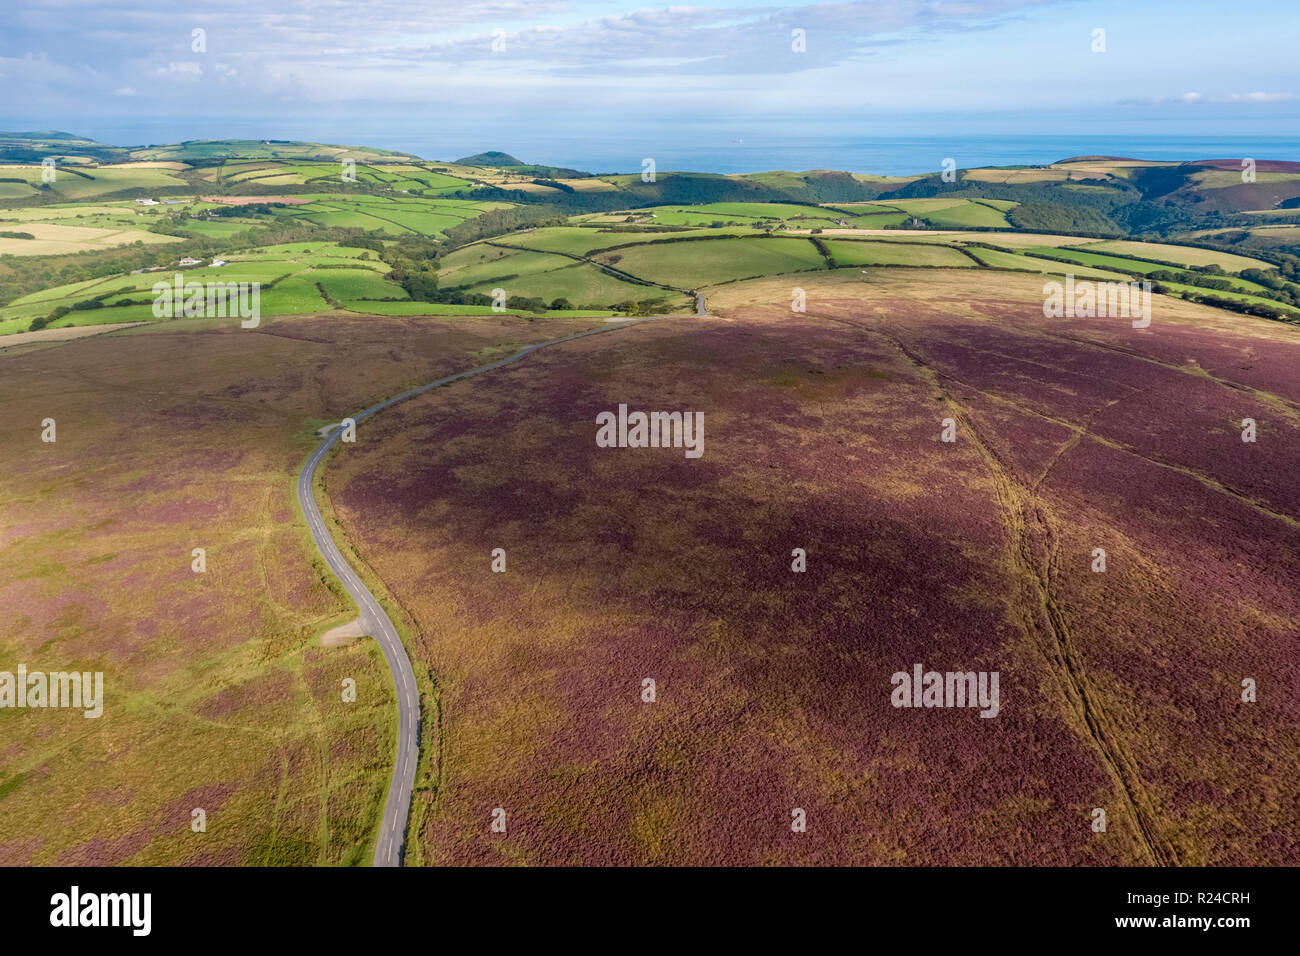 Aerial view over the moors, Exmoor National Park, Devon, England, United Kingdom, Europe Stock Photo